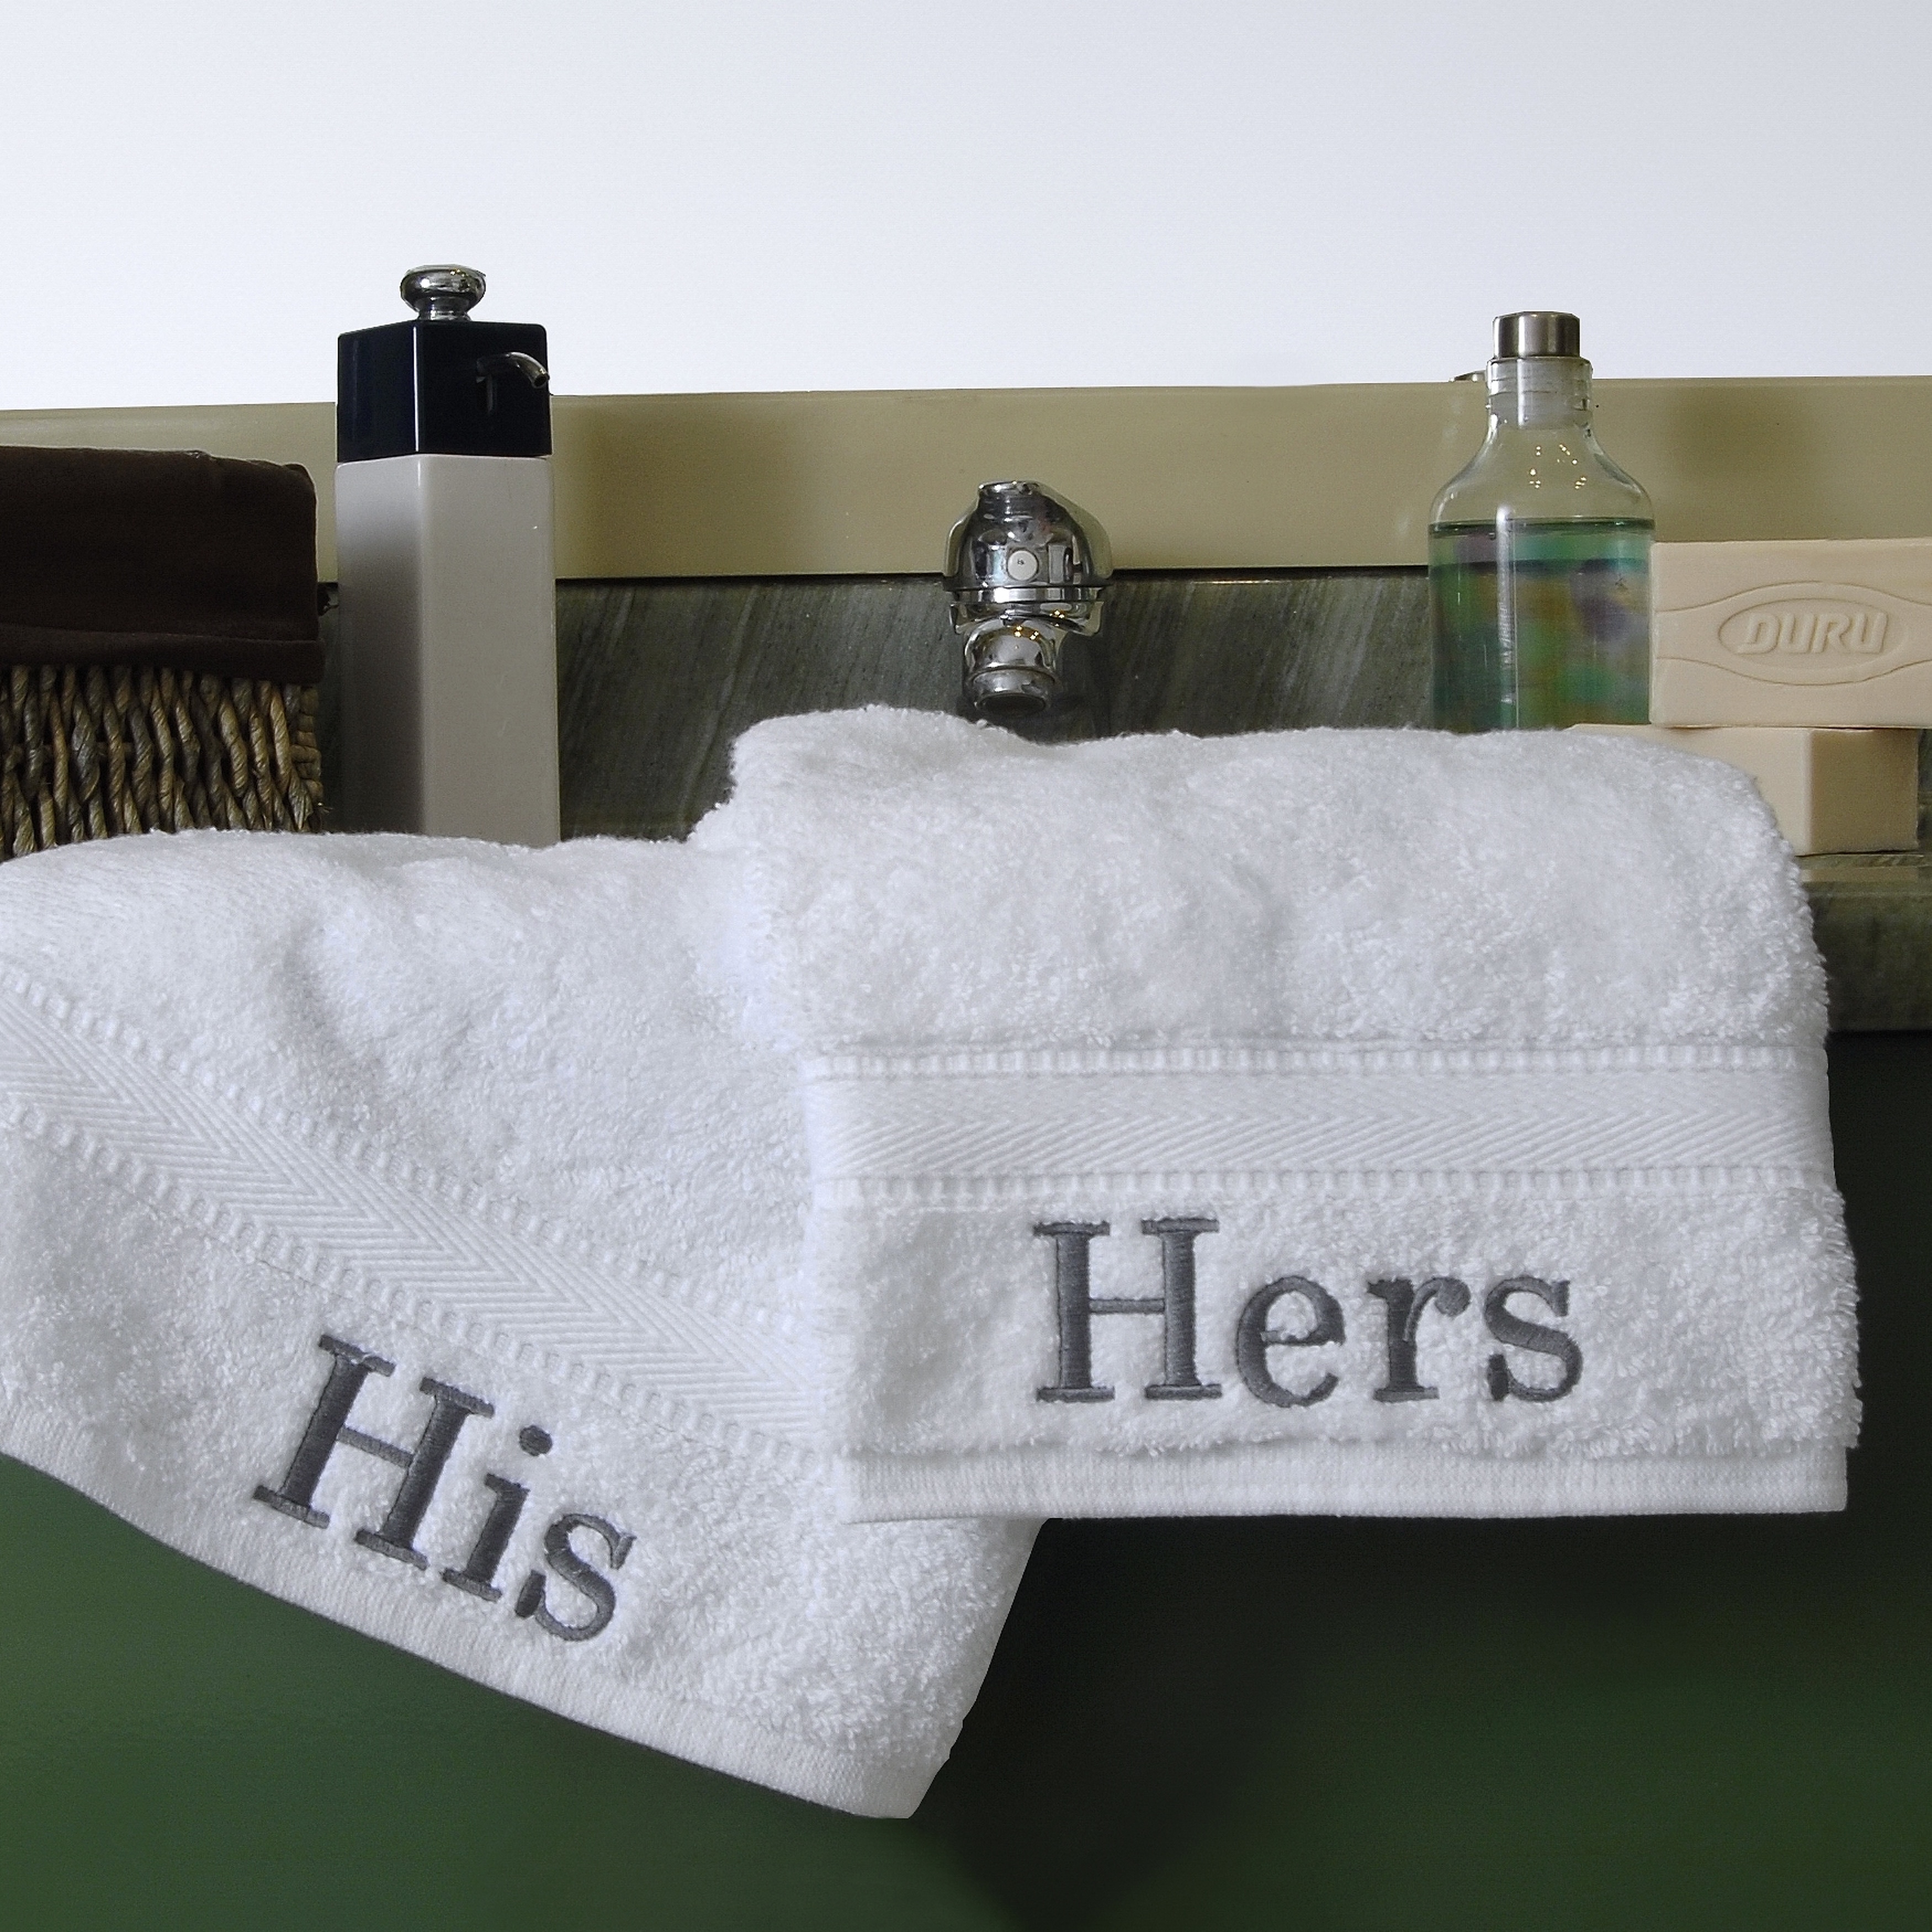 https://ak1.ostkcdn.com/images/products/7710837/7710837/Authentic-Hotel-Personalized-His-and-Hers-Turkish-Cotton-Hand-Towels-Set-of-2-L15116505.jpg